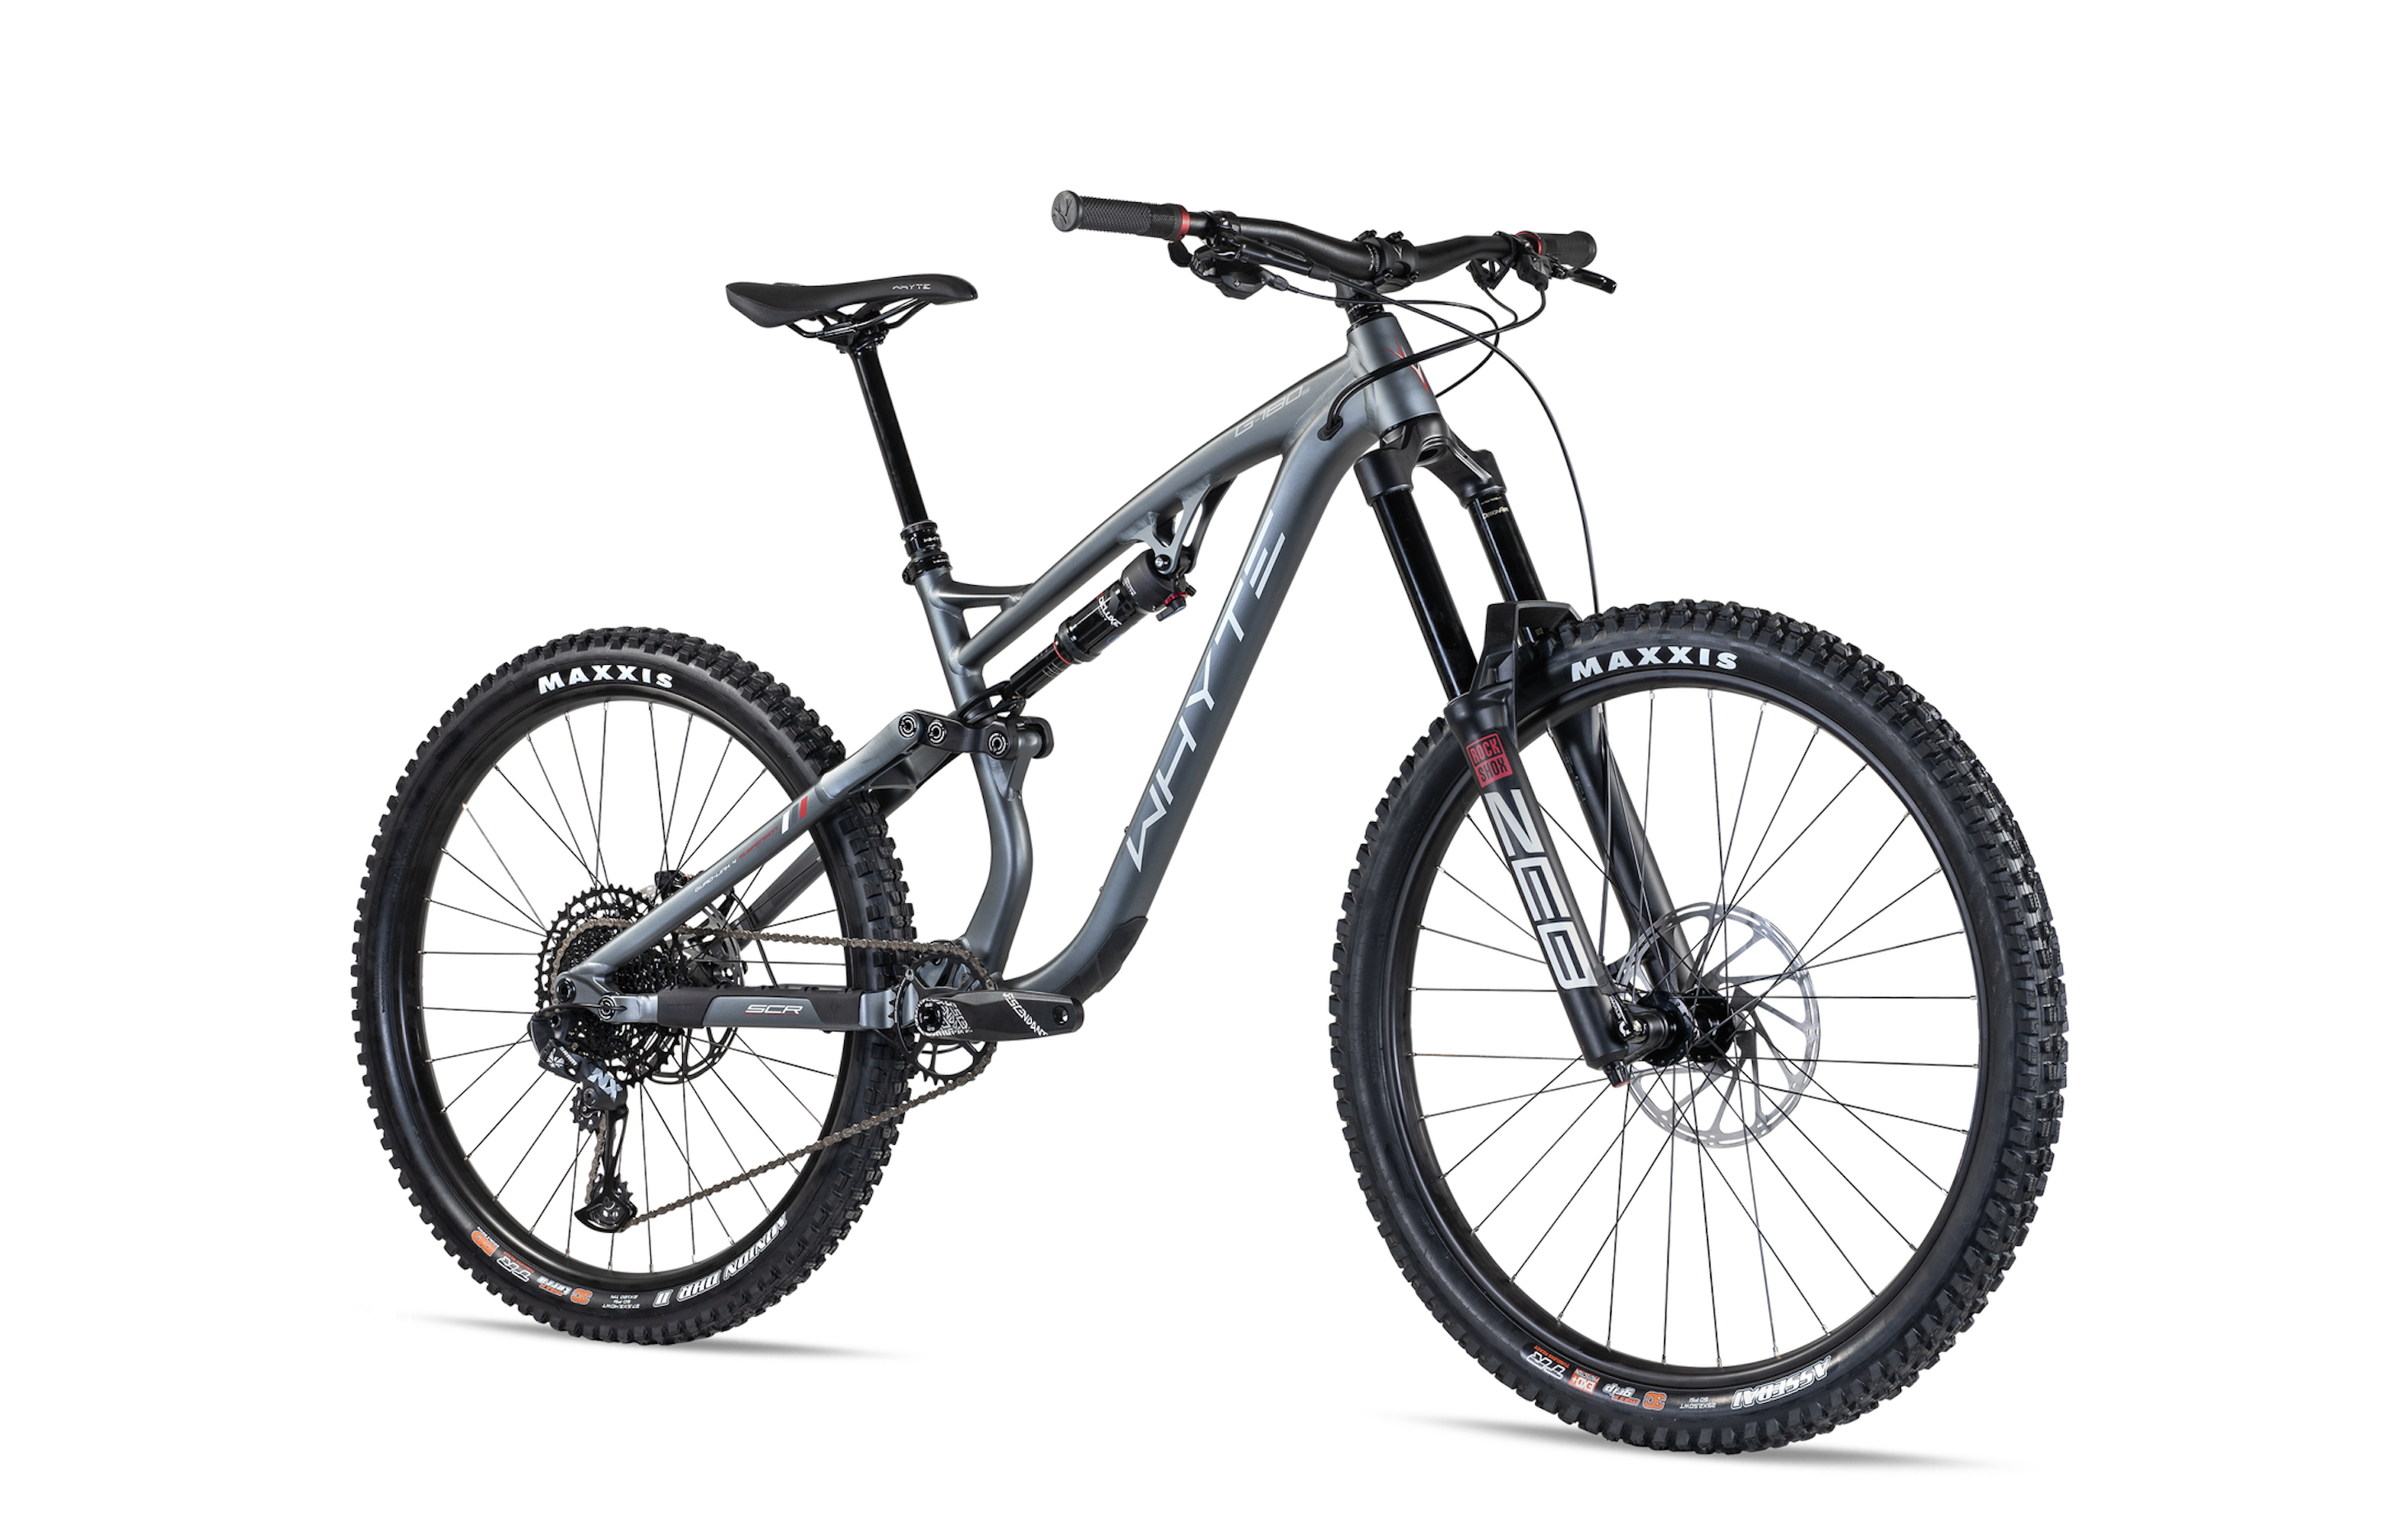 Whyte G-180 MX – The Beast of Both Worlds